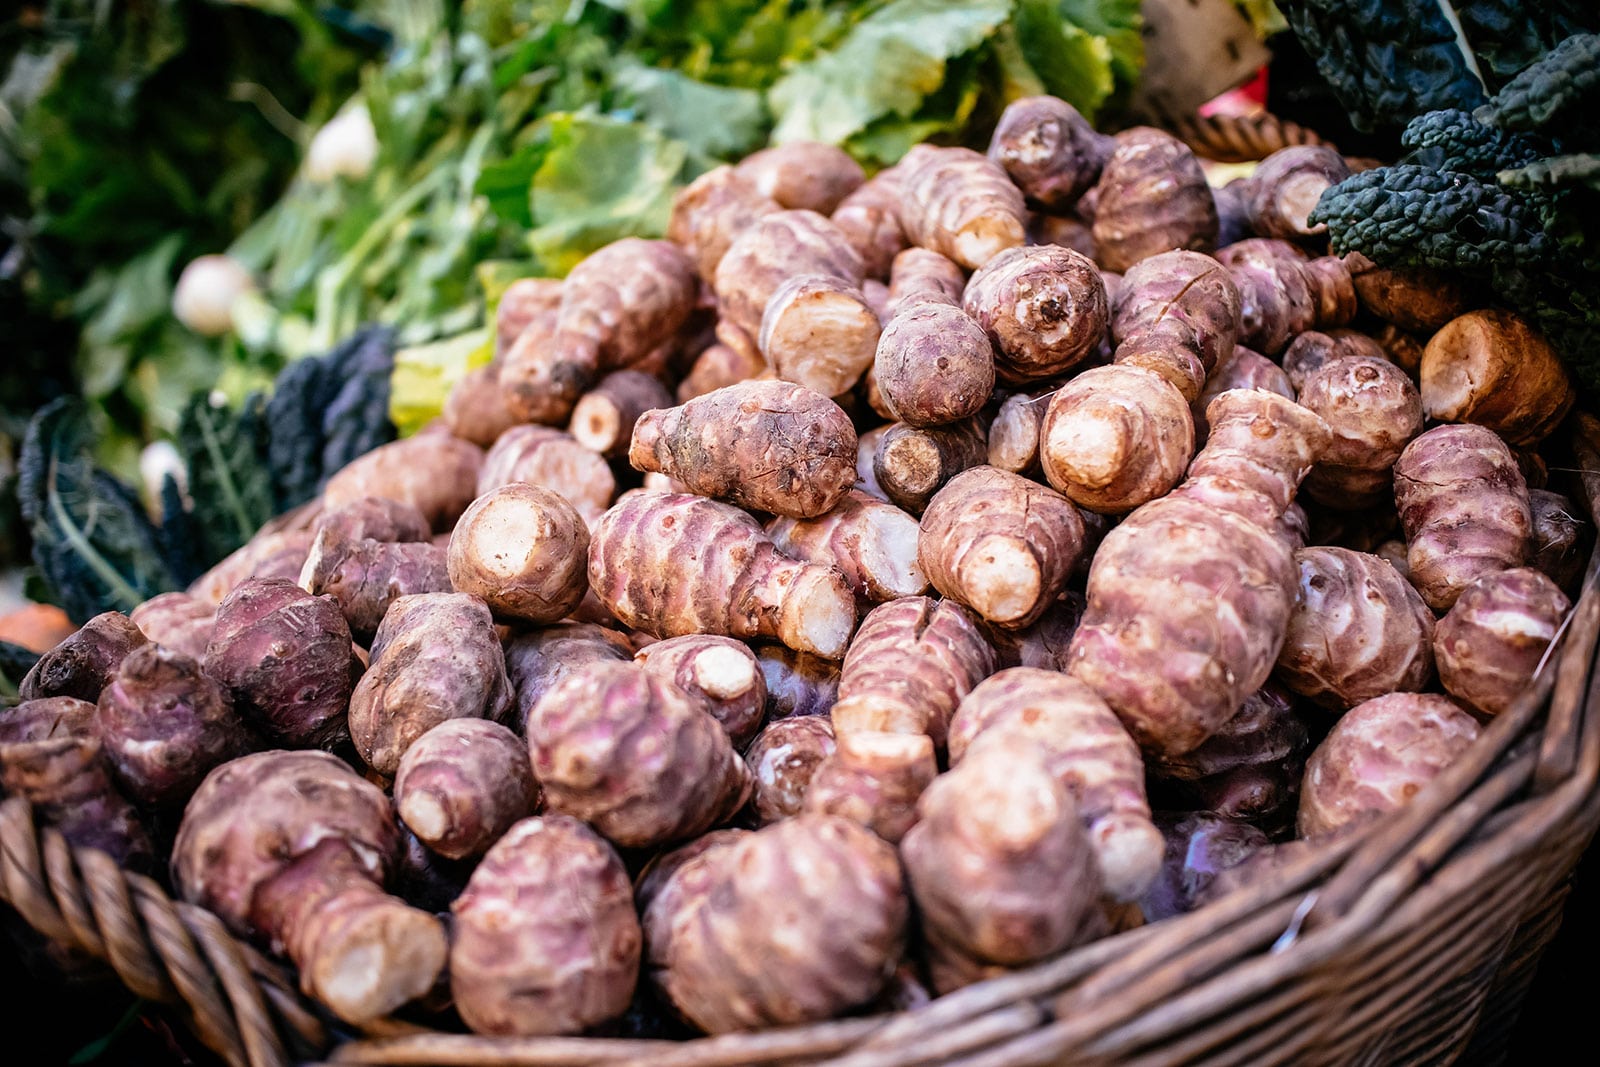 Pile of sunchokes in a basket at the farmers' market